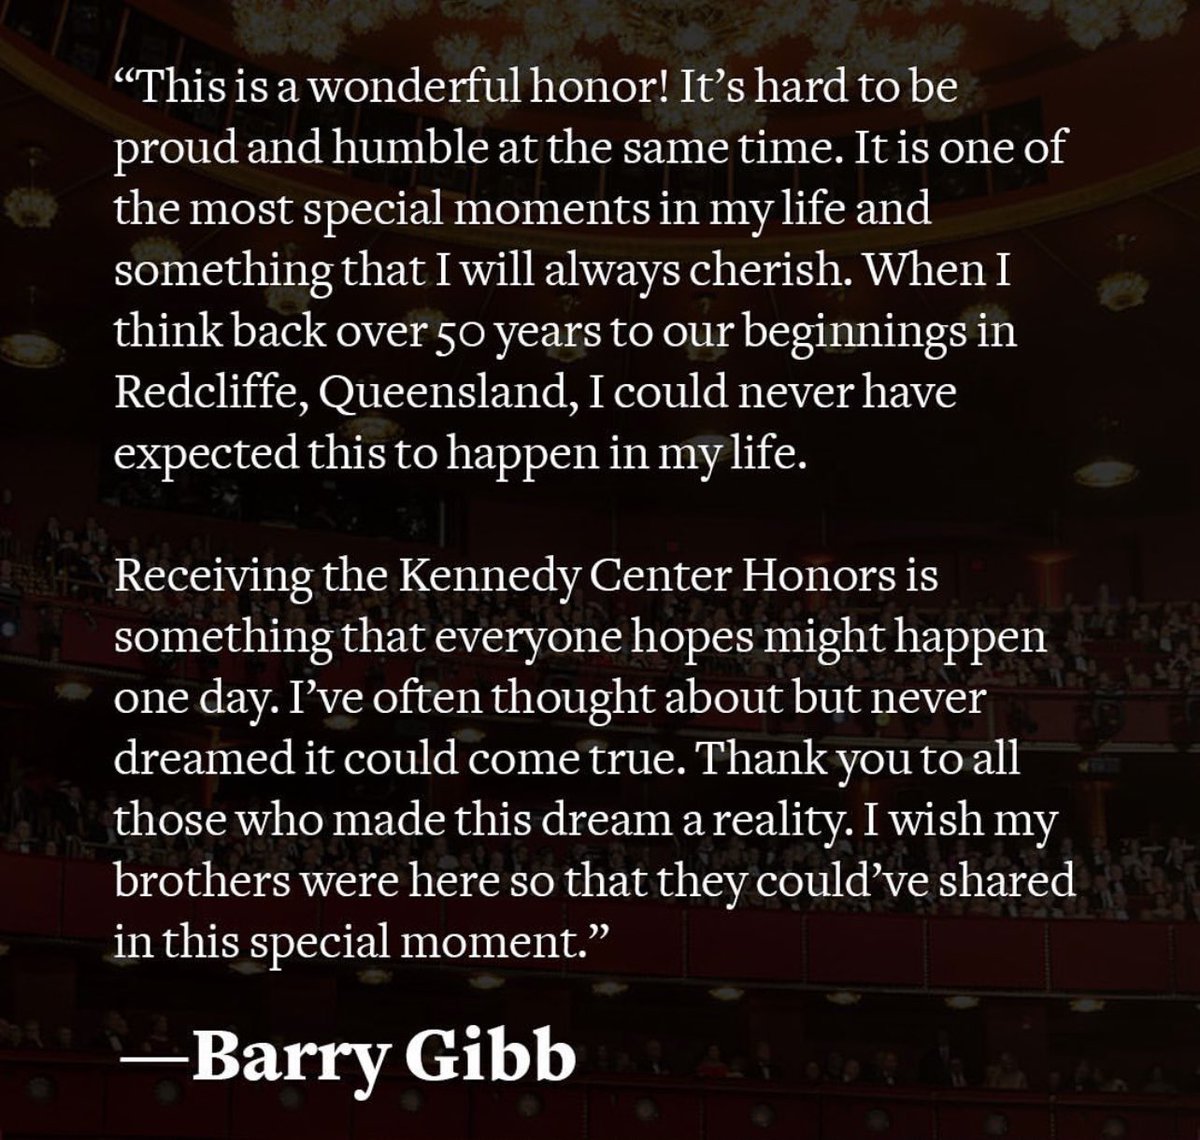 Congrats to one of my fave people, BARRY GIBB, recognized for his lifetime artistic achievements at the 46th @KCHonors on Dec. 3rd.

I’m extremely happy for Barry and the Gibb family and the Gibb legacy for this amazing honor.

BARRY’s STATEMENT in PHOTO #3 

#BarryGibb #BeeGees